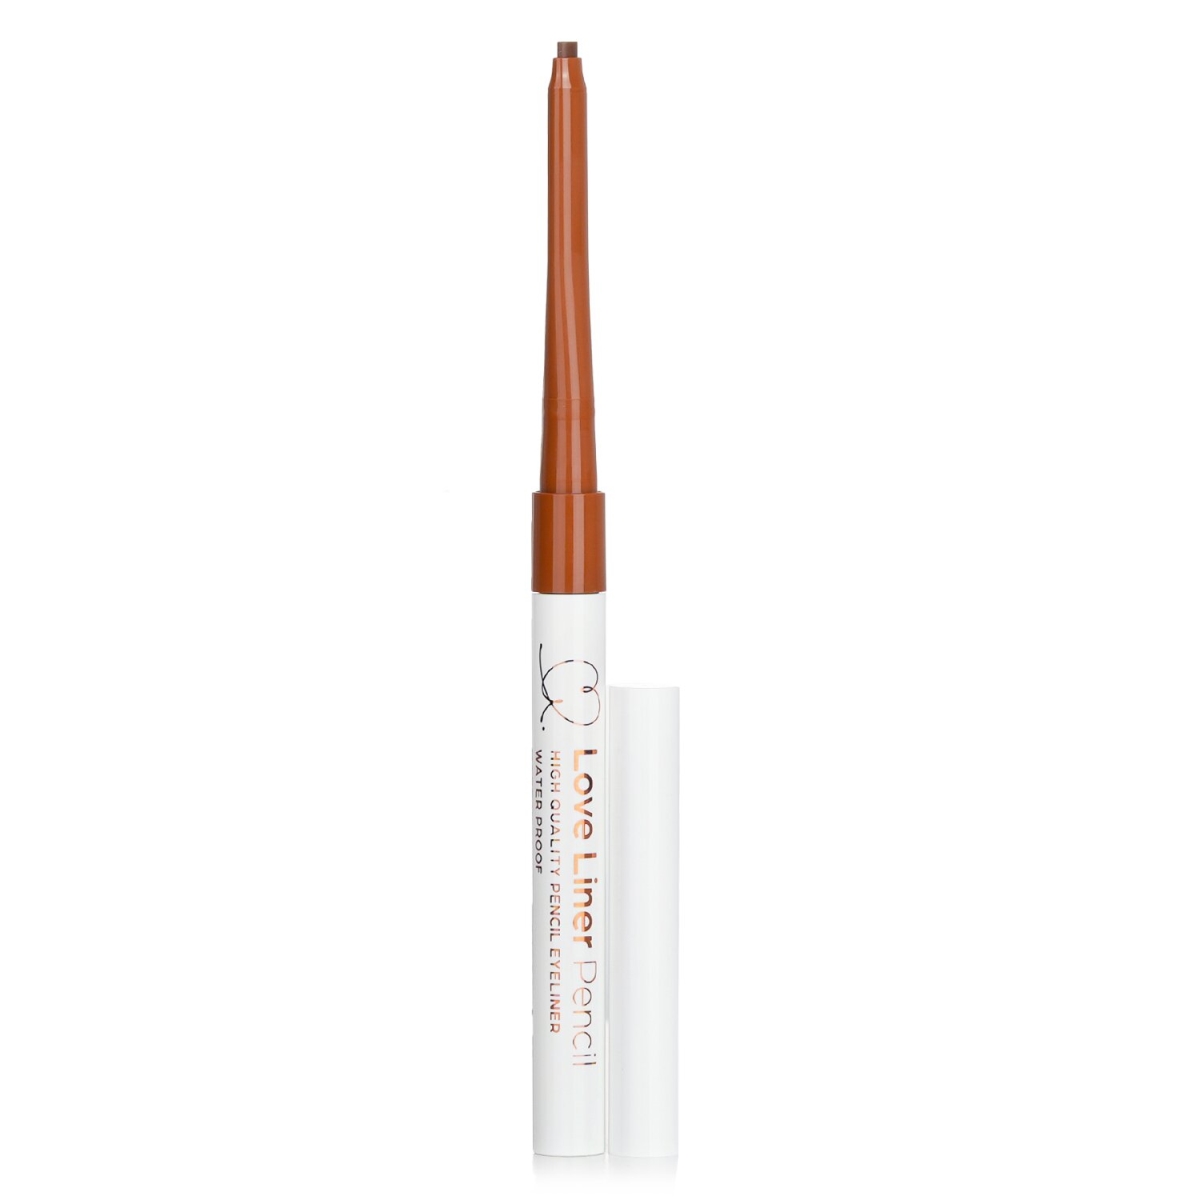 Picture of Love Liner 284389 0.1 g High Quality Water Proof Pencil Eyeliner - Maple Brown